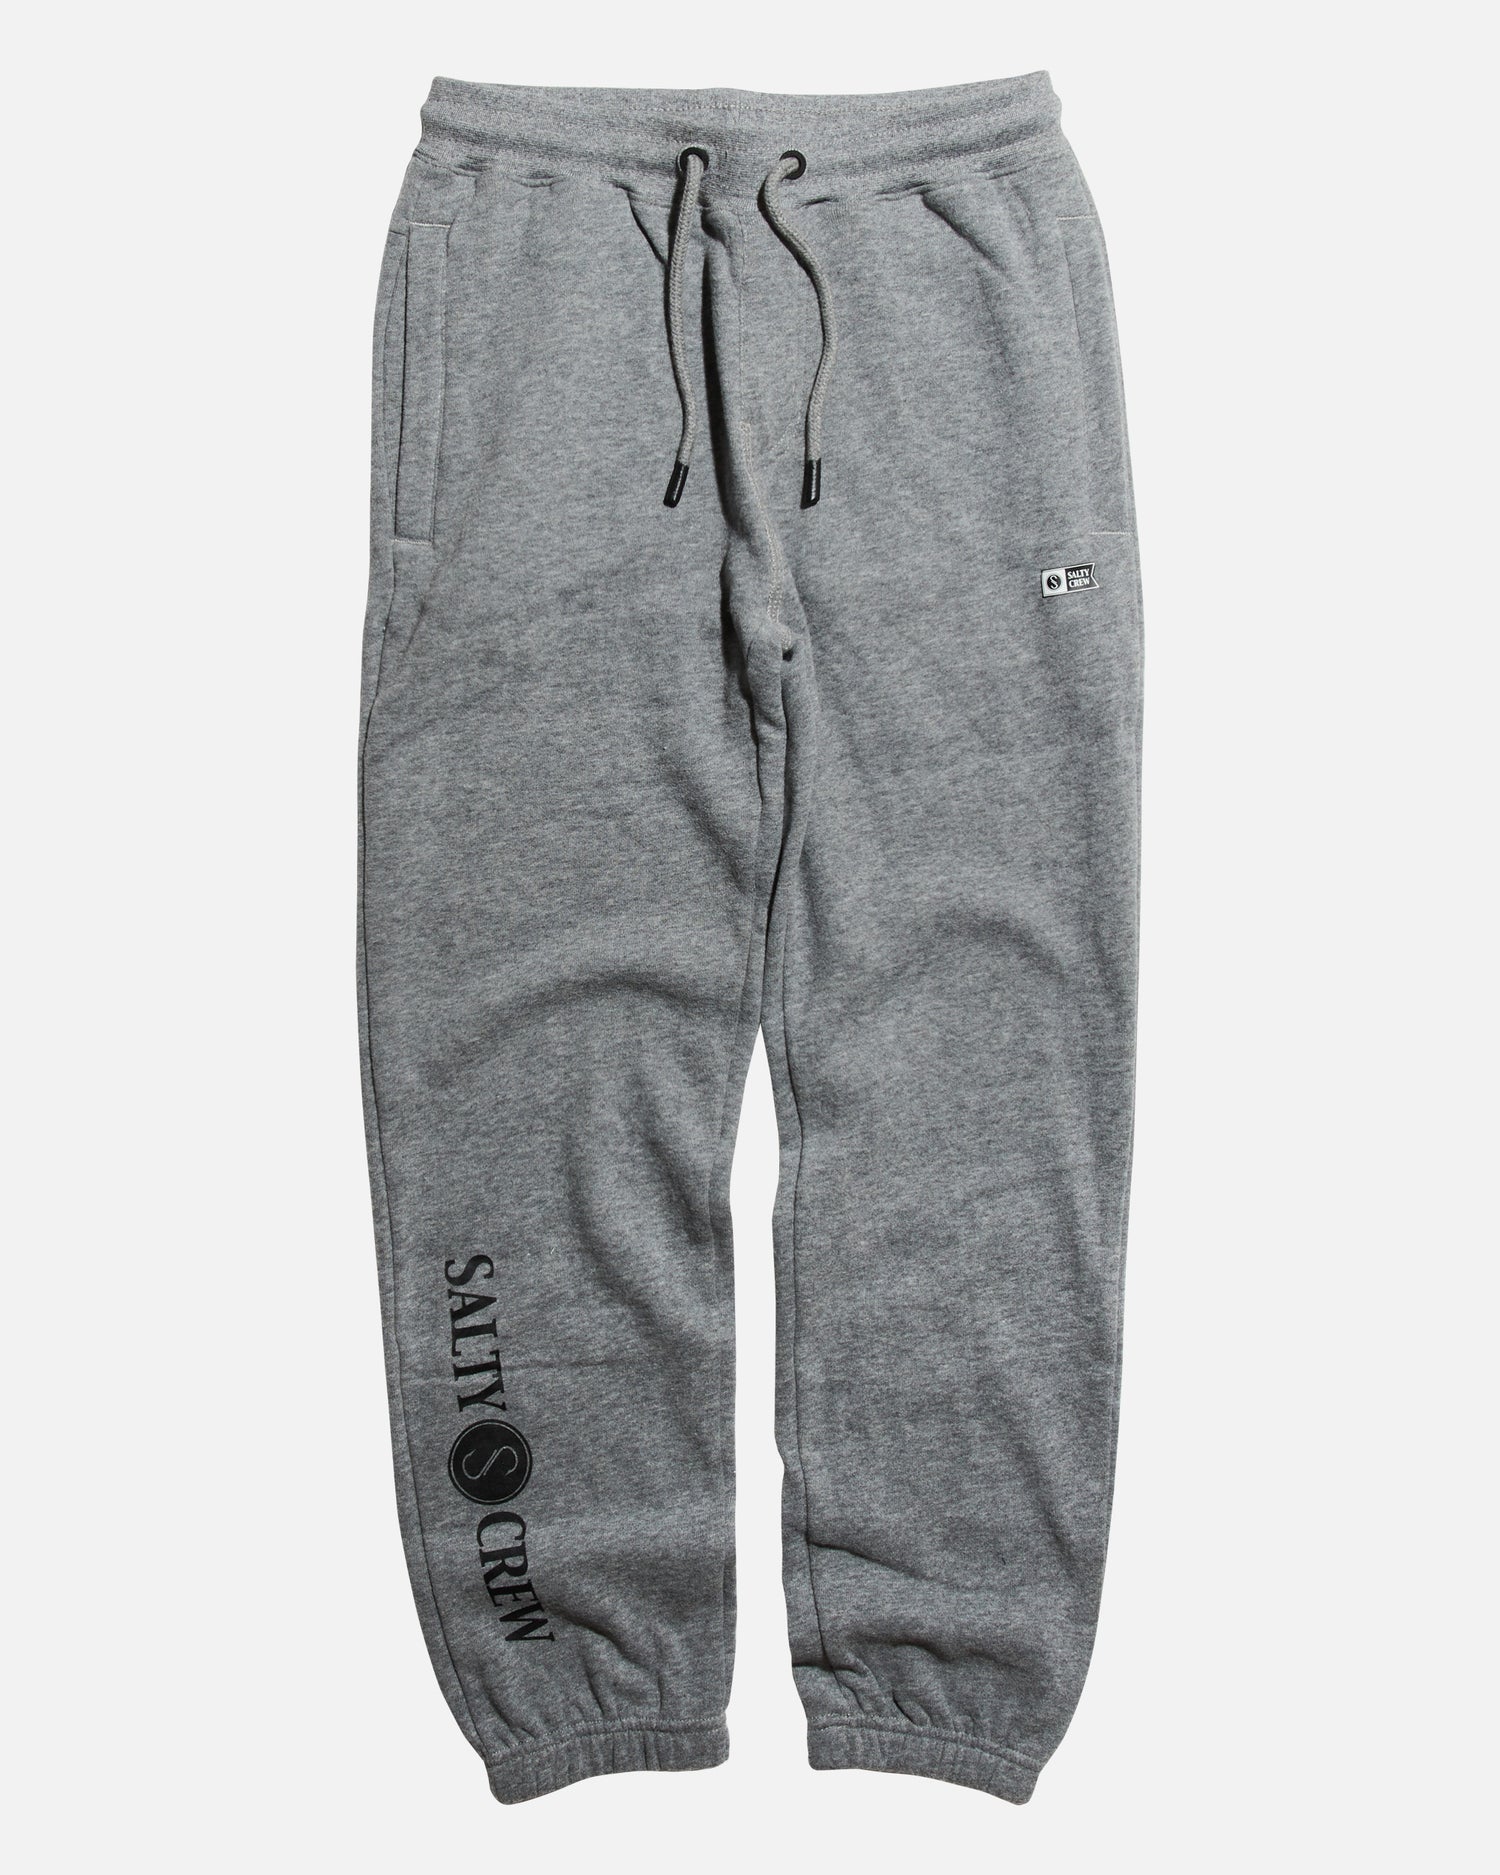 front view of Dockside Grey/Heather Boys Sweatpant